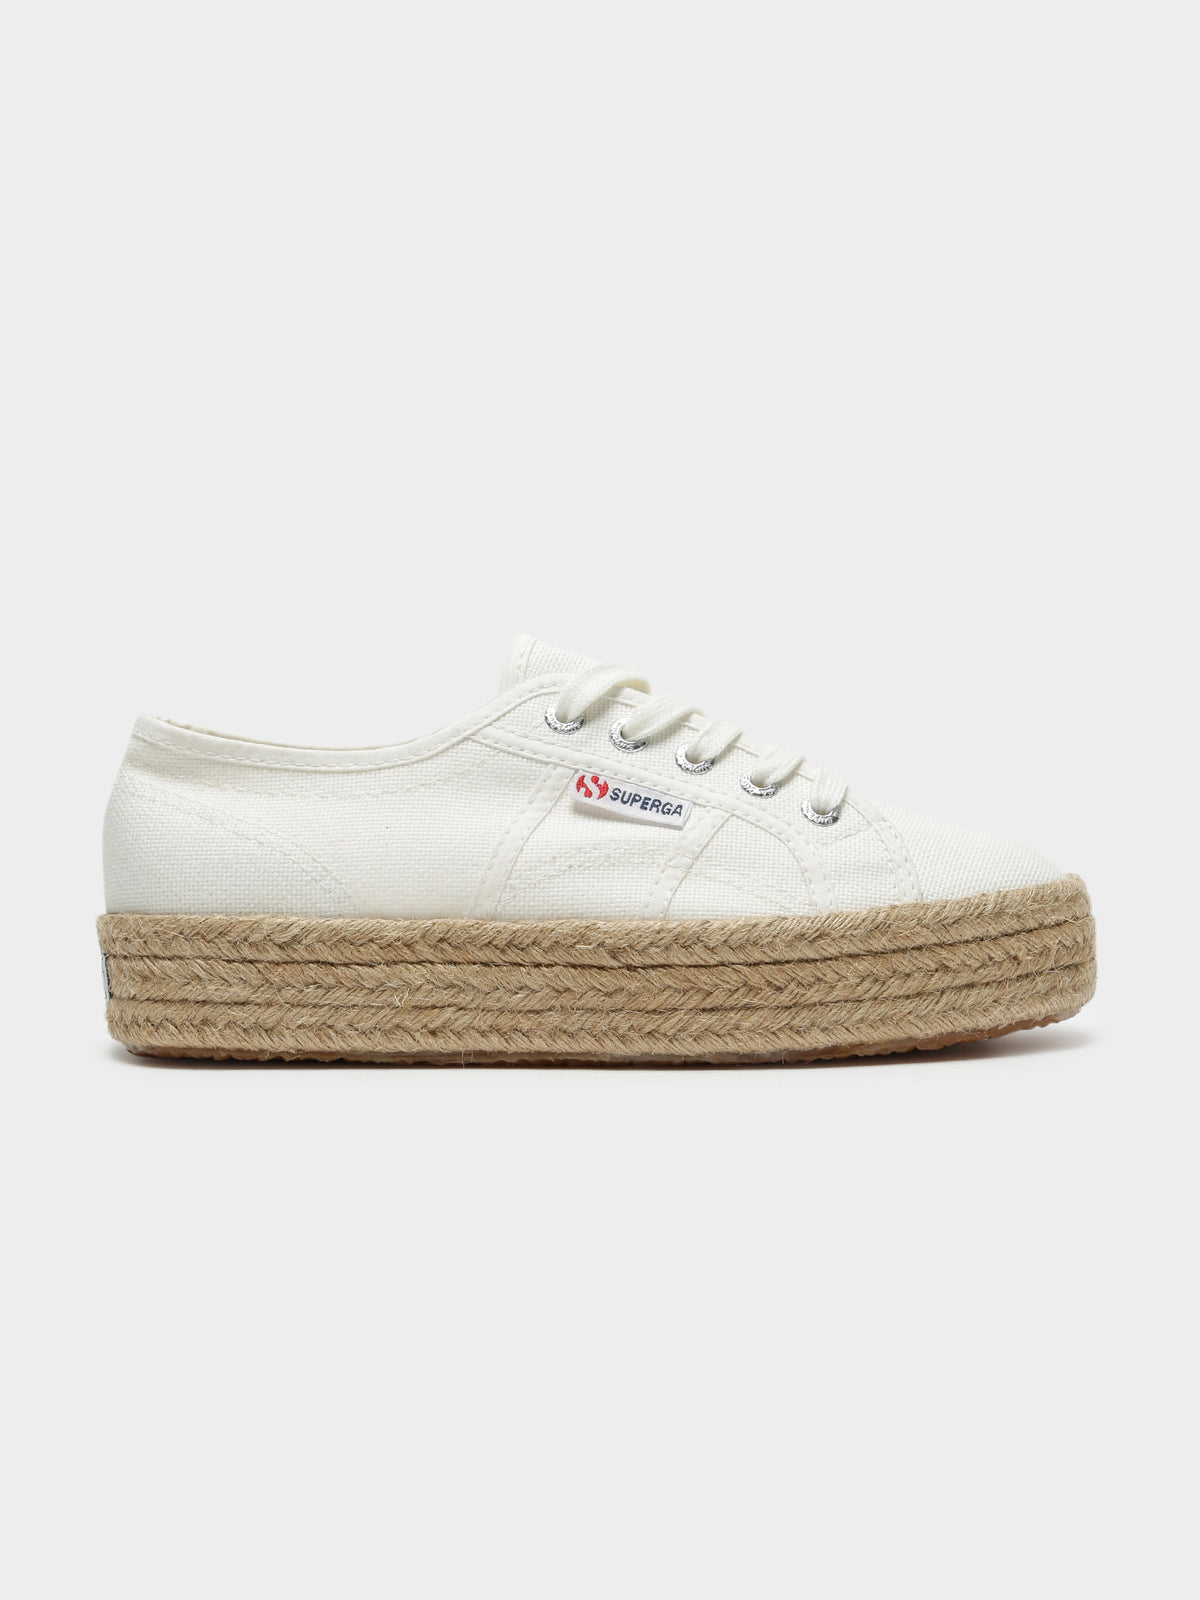 Womens 2730 Cotropew Sneakers in White